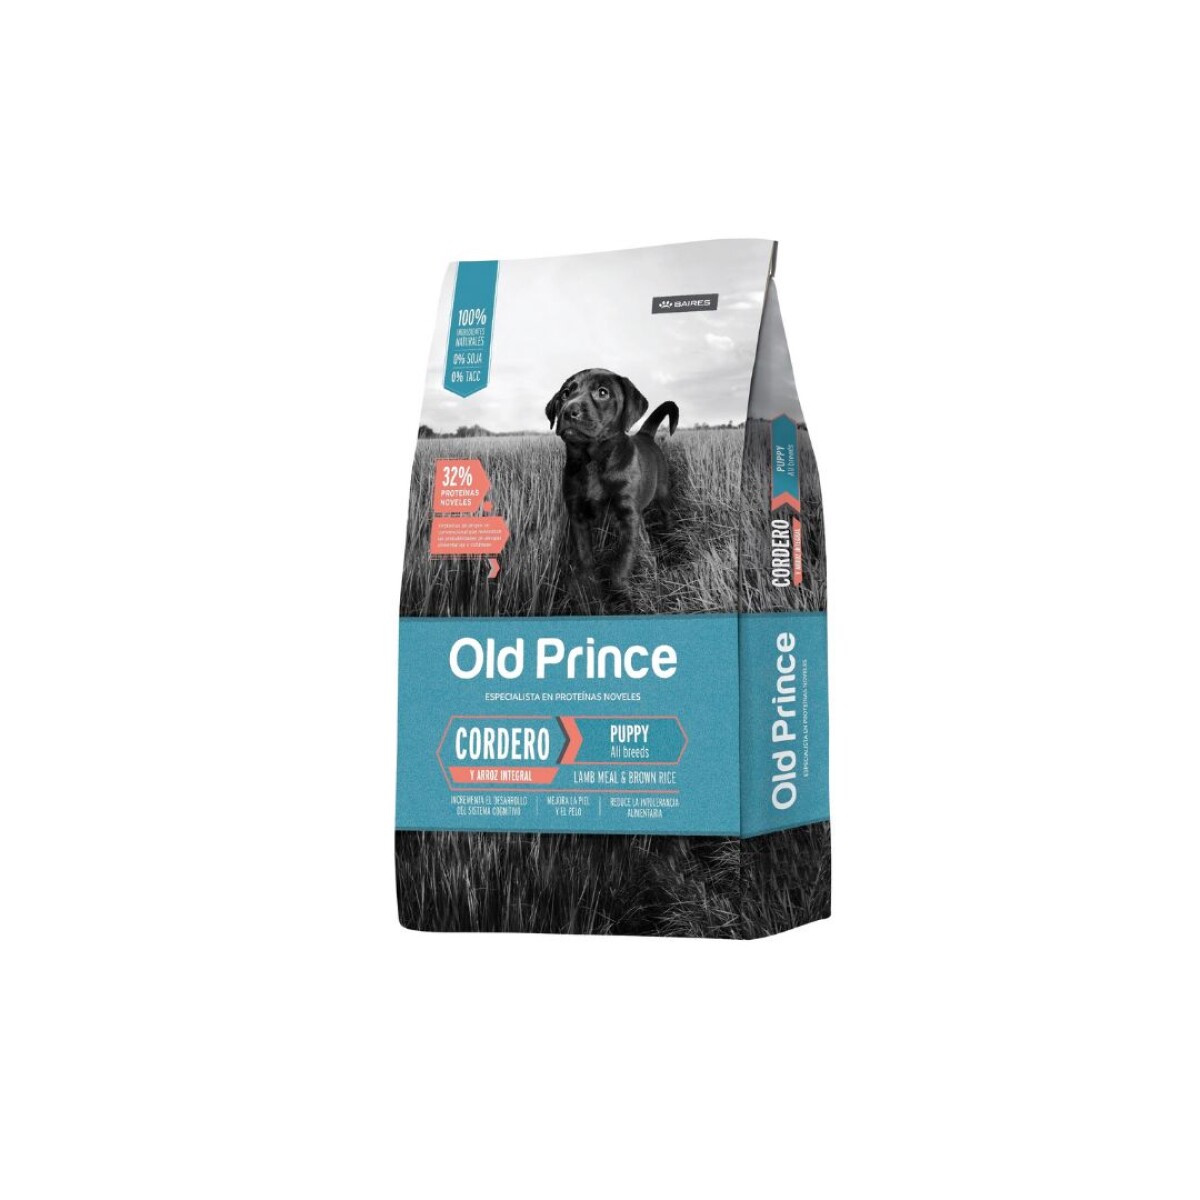 OLD PRINCE NOVEL CACH CORD Y ARR INT 7,5KG - Unica 